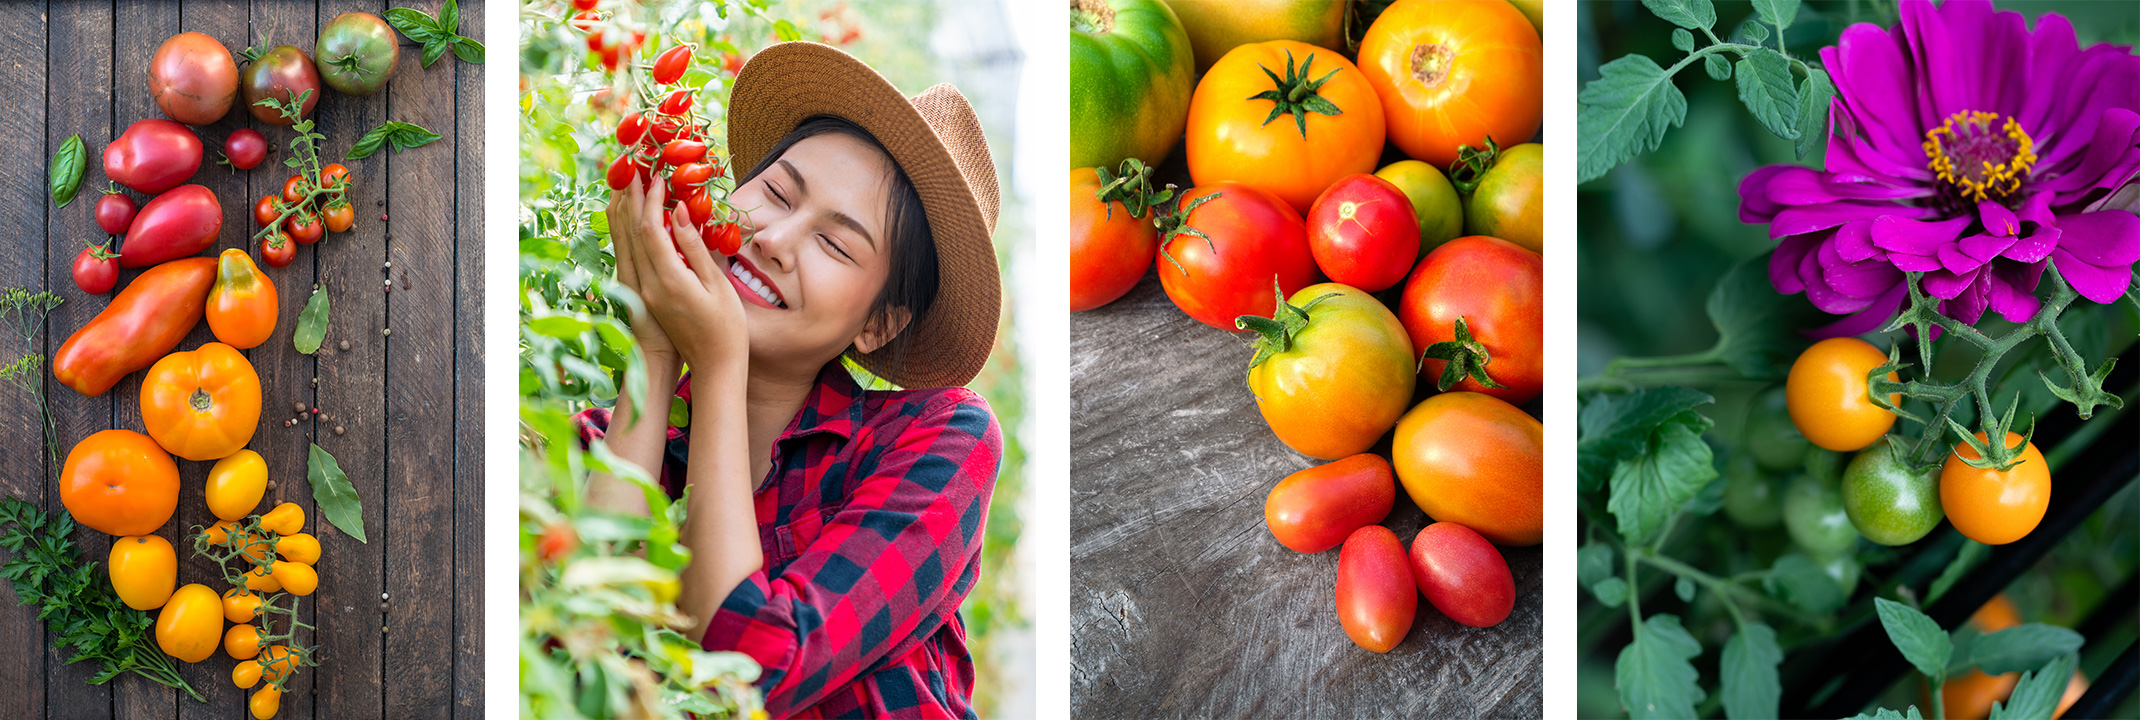 Numerous pictures of a variety of tomatoes, one with a woman cuddling up to them growing on the vine, another with a purple flower.